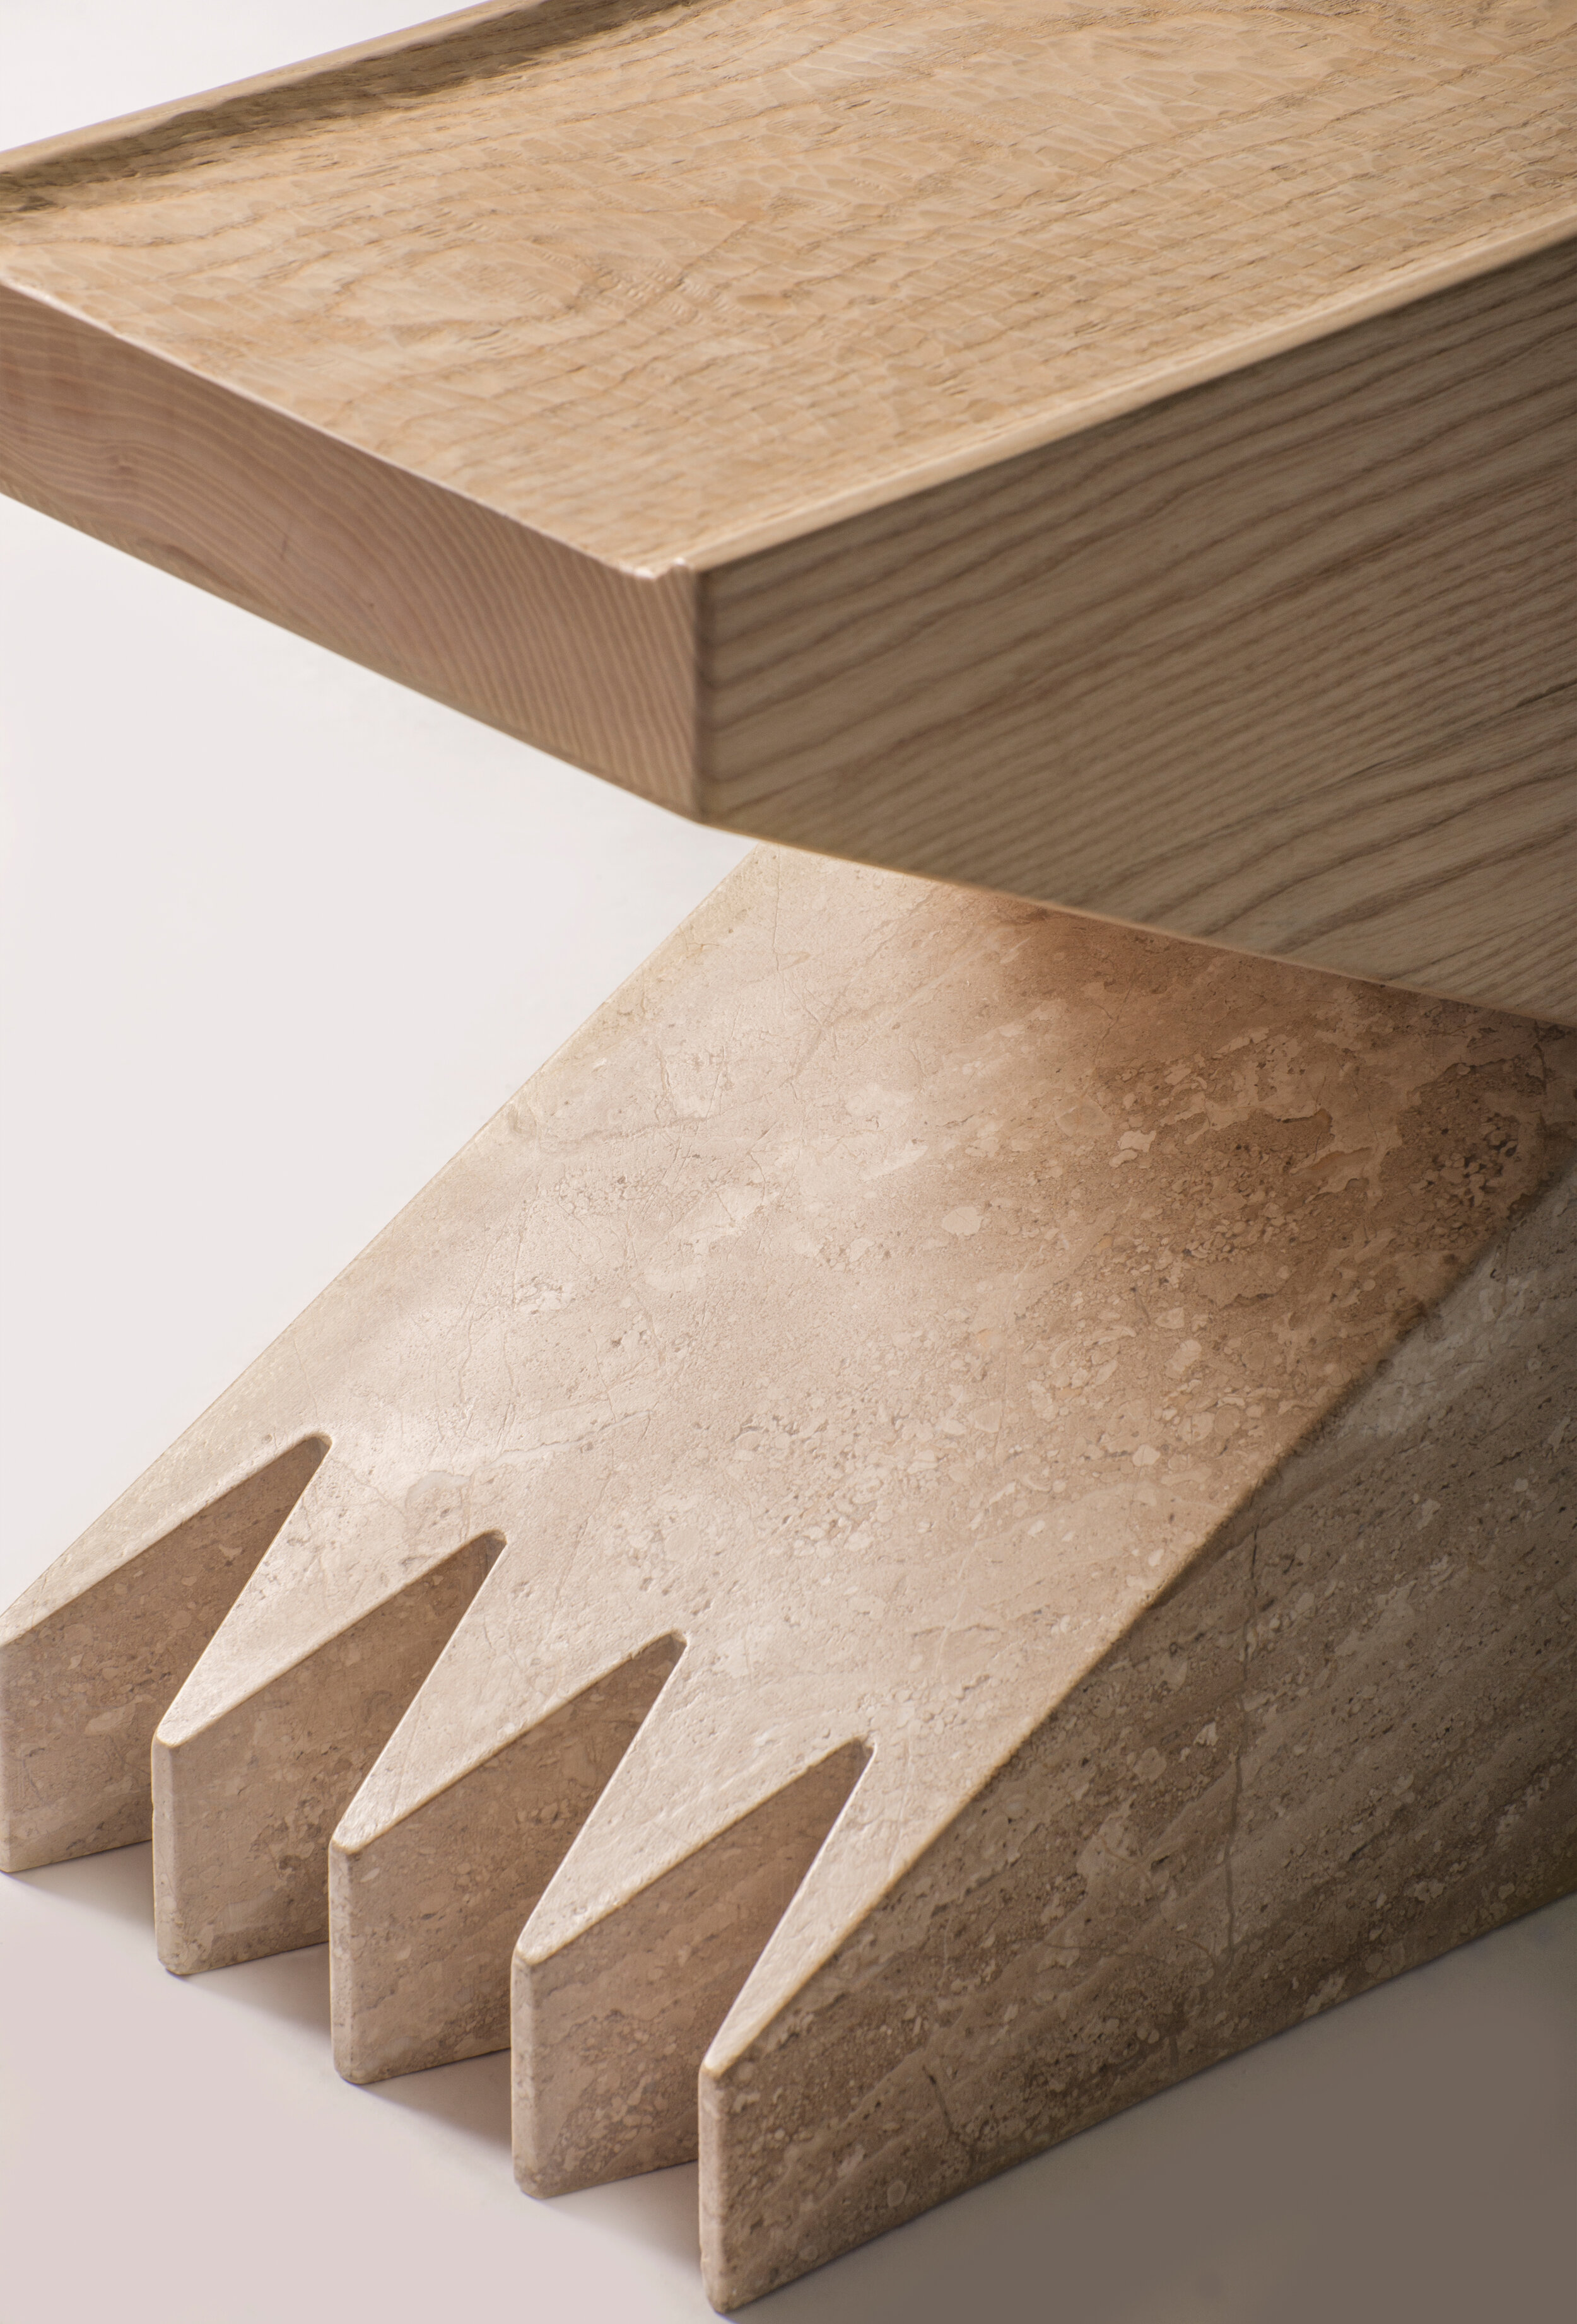 Mannu Side Table, designed by Ambroise Maggiar, made by Karmine Piras & CP Basalti_close up.jpg